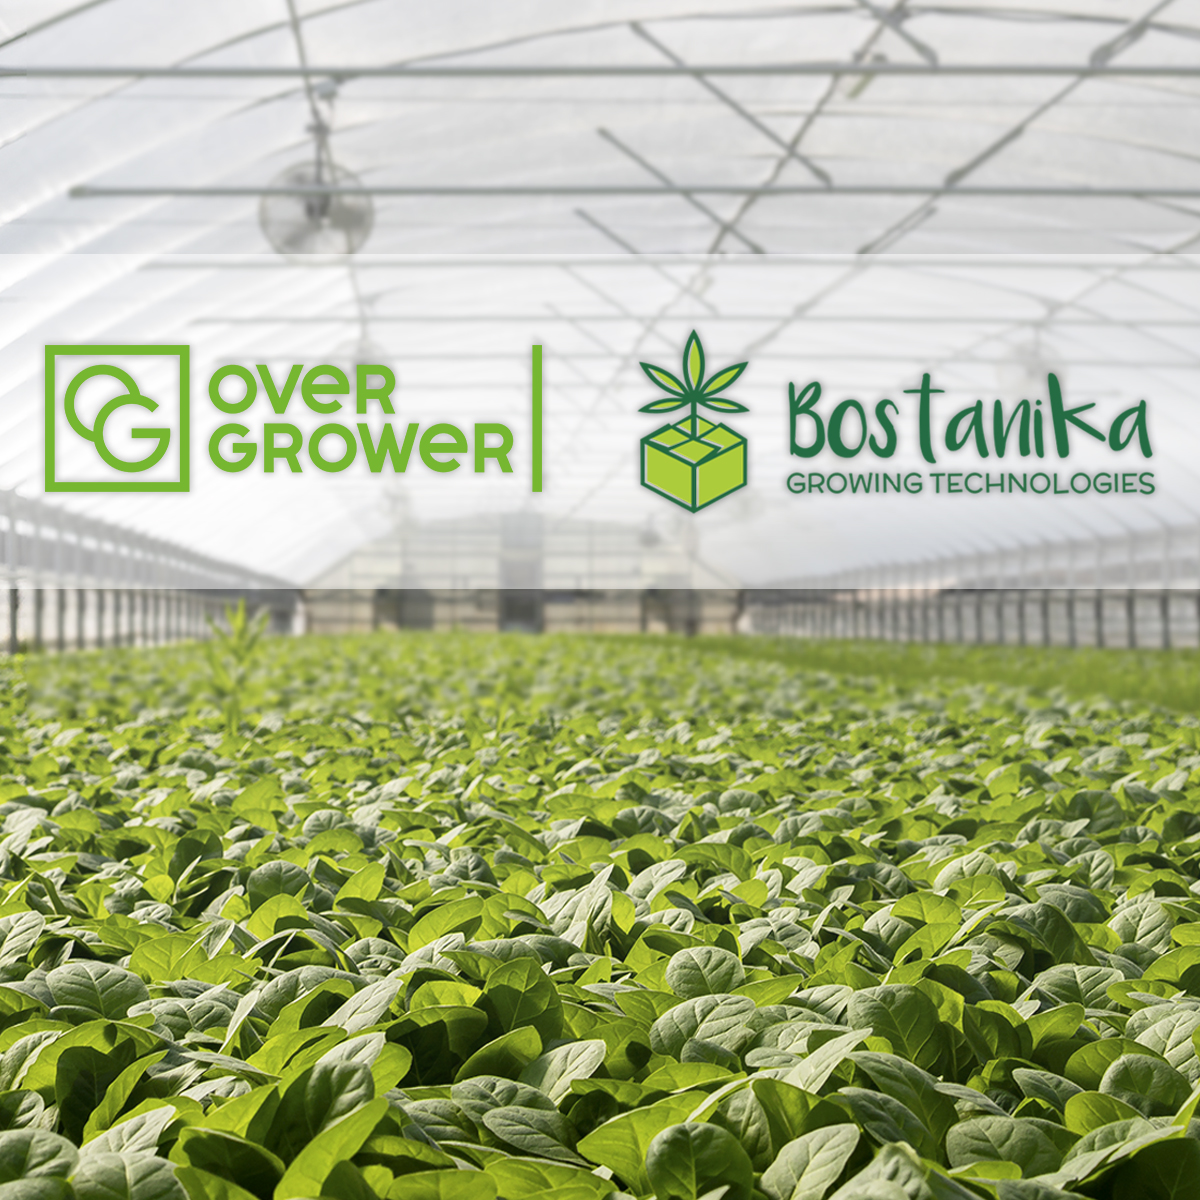 The Partnership Agreement with Bostanika Growing Technologies executed!